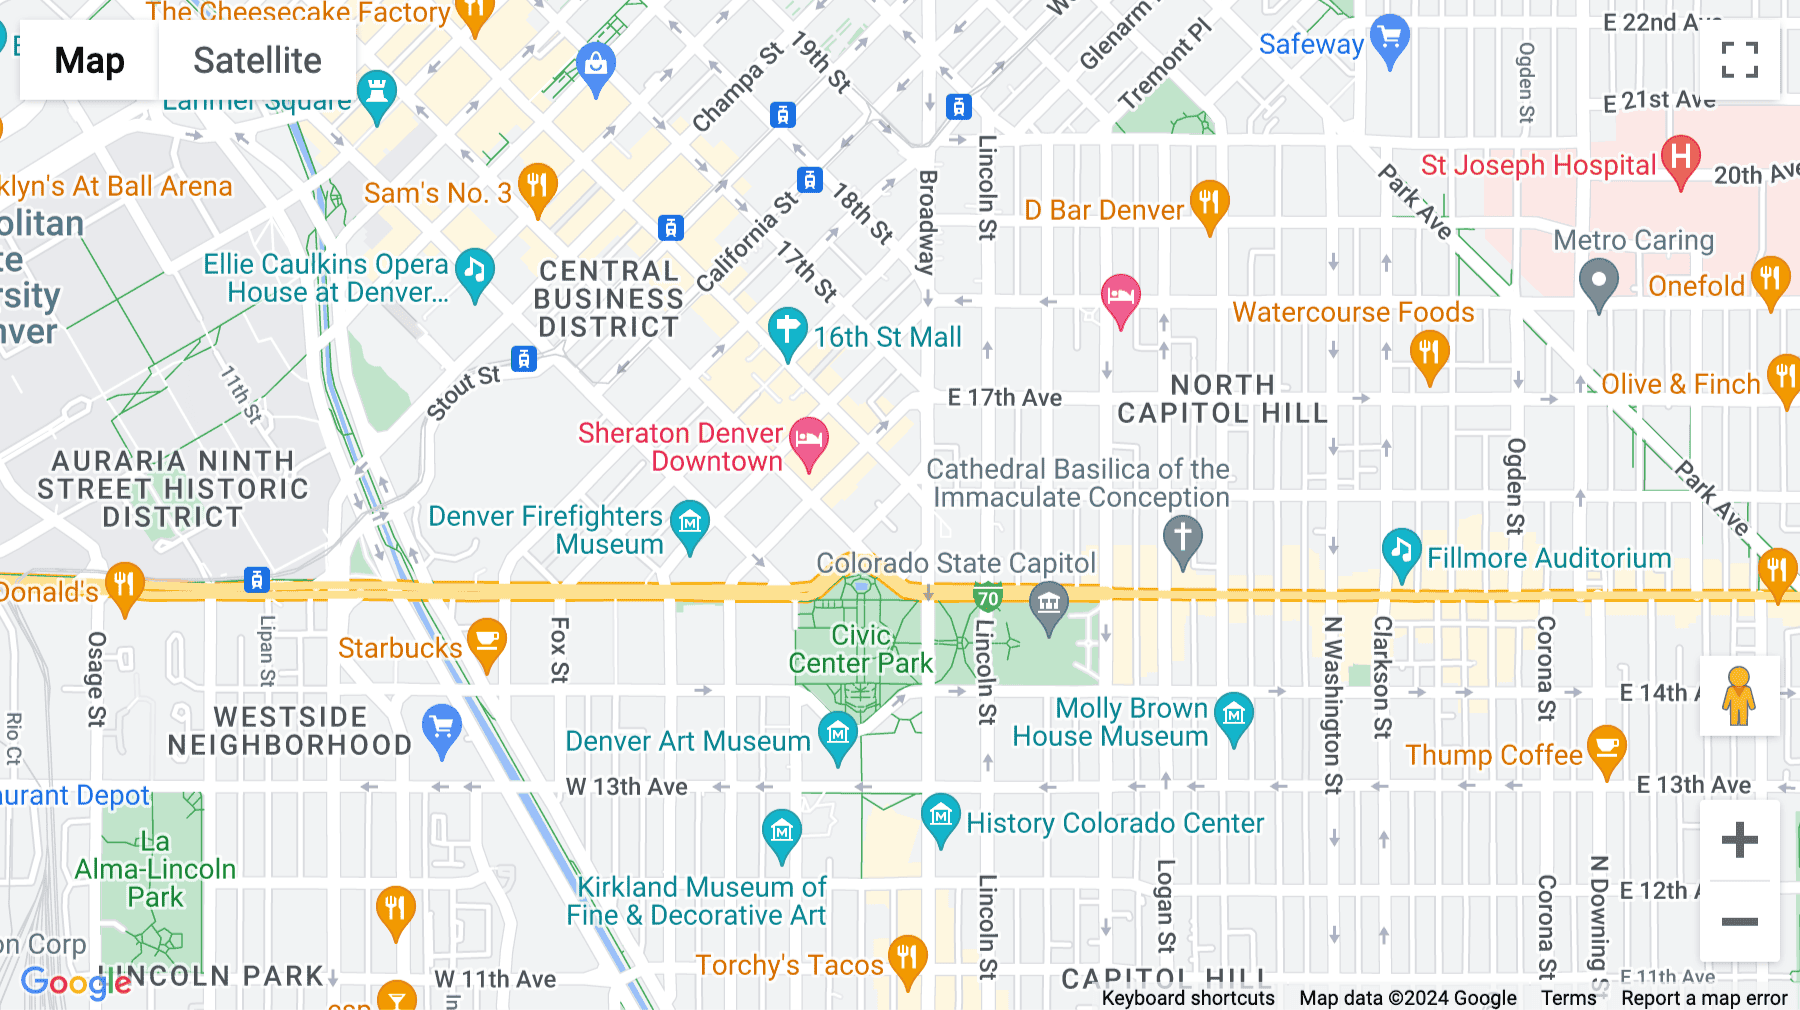 Click for interative map of 110 16th Street Mall, Suite 1400, Denver, Downtown, Denver